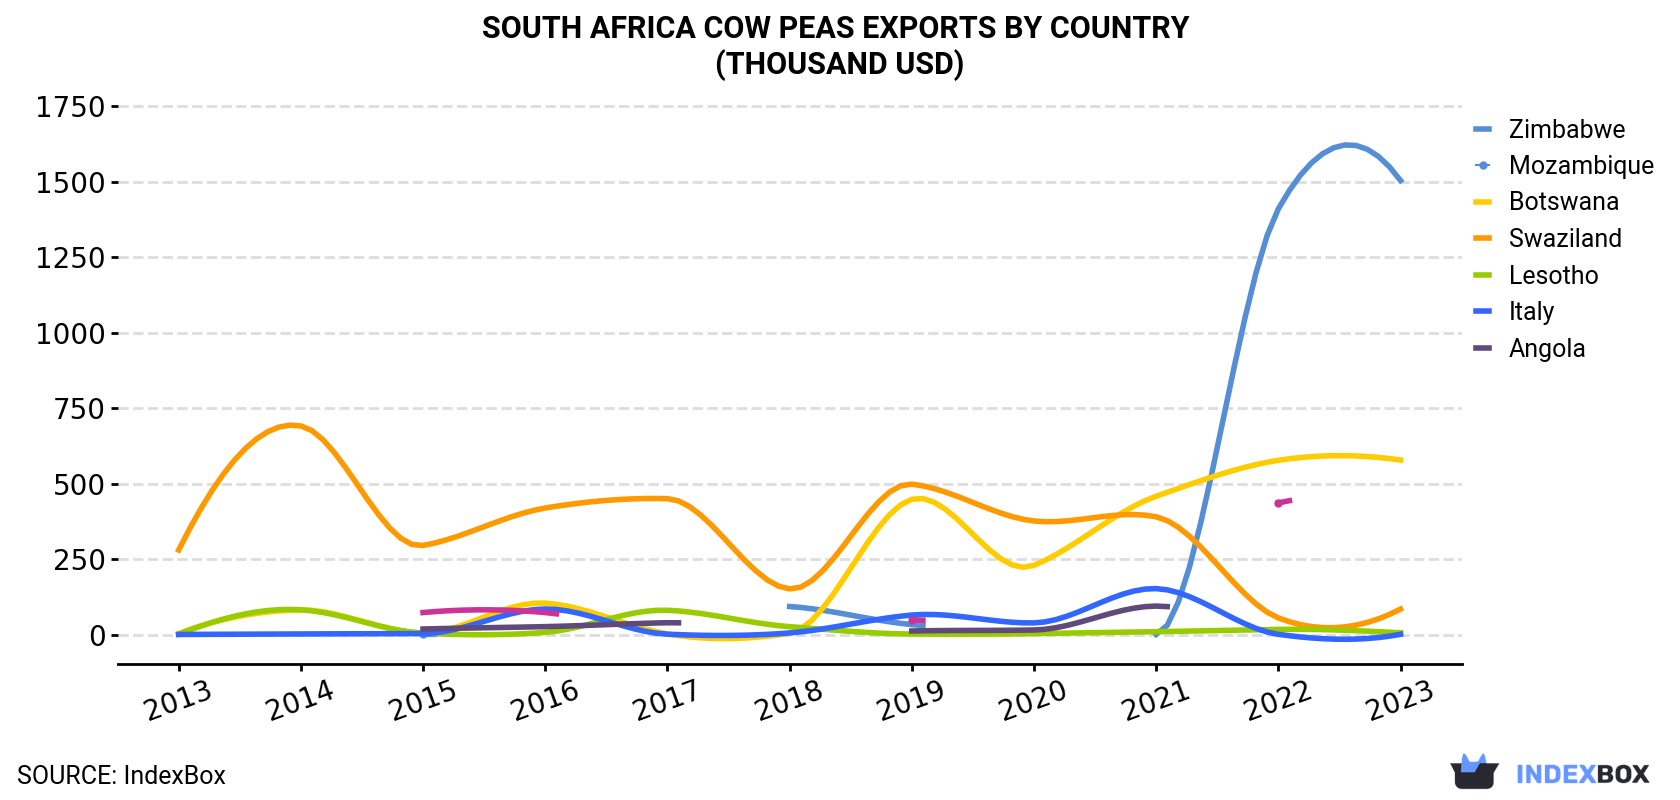 South Africa Cow Peas Exports By Country (Thousand USD)